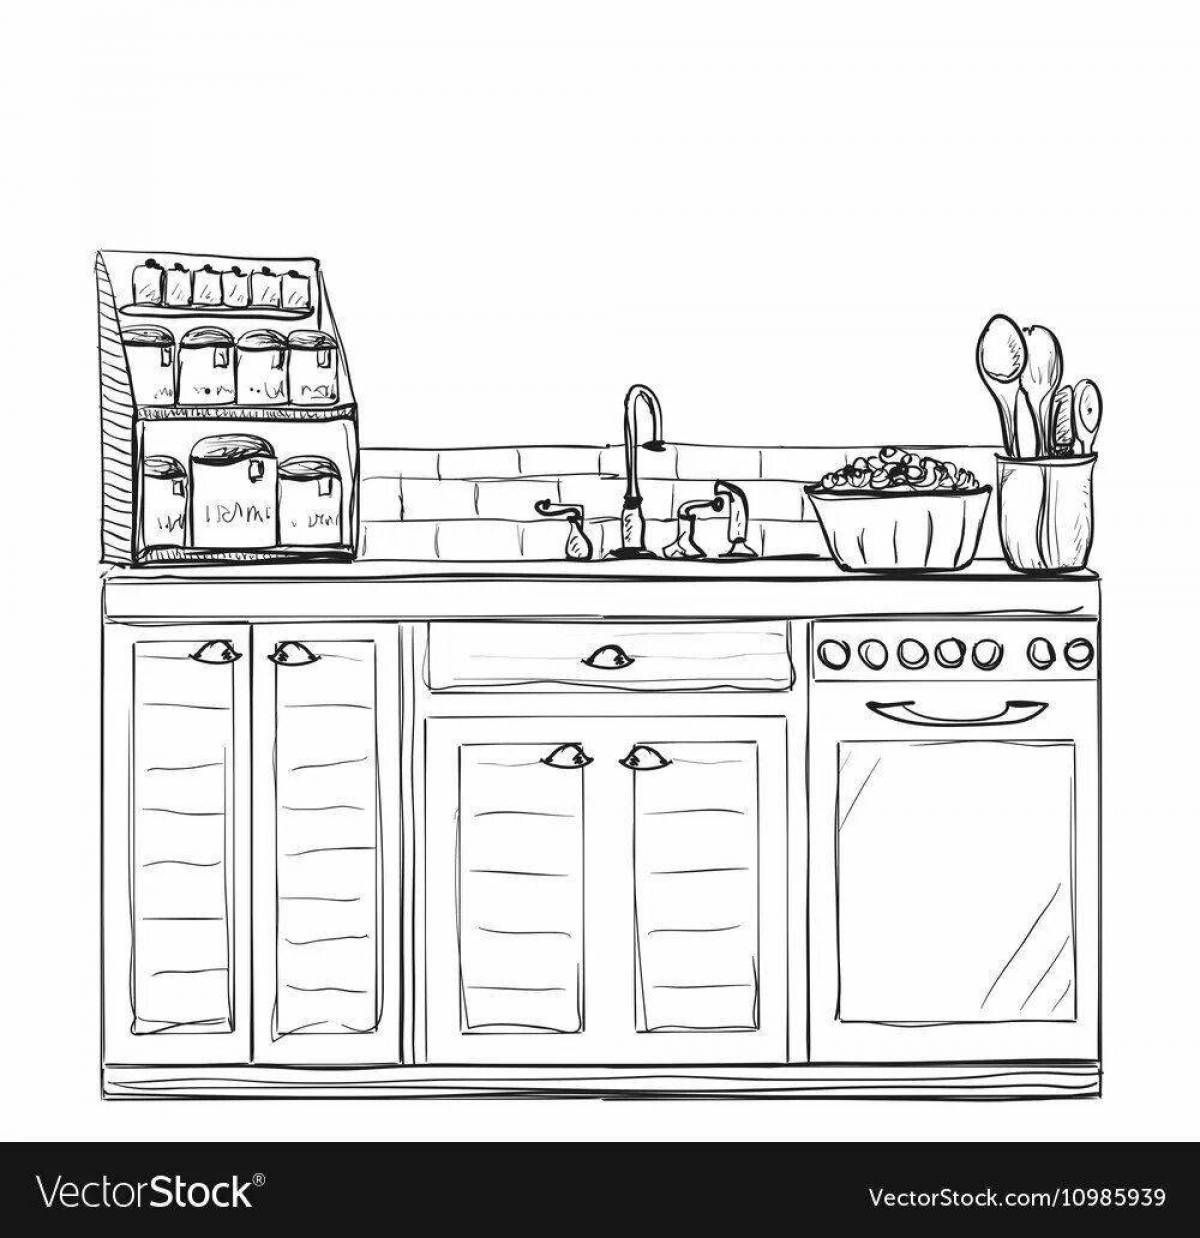 Coloring page of an attractive kitchen cabinet